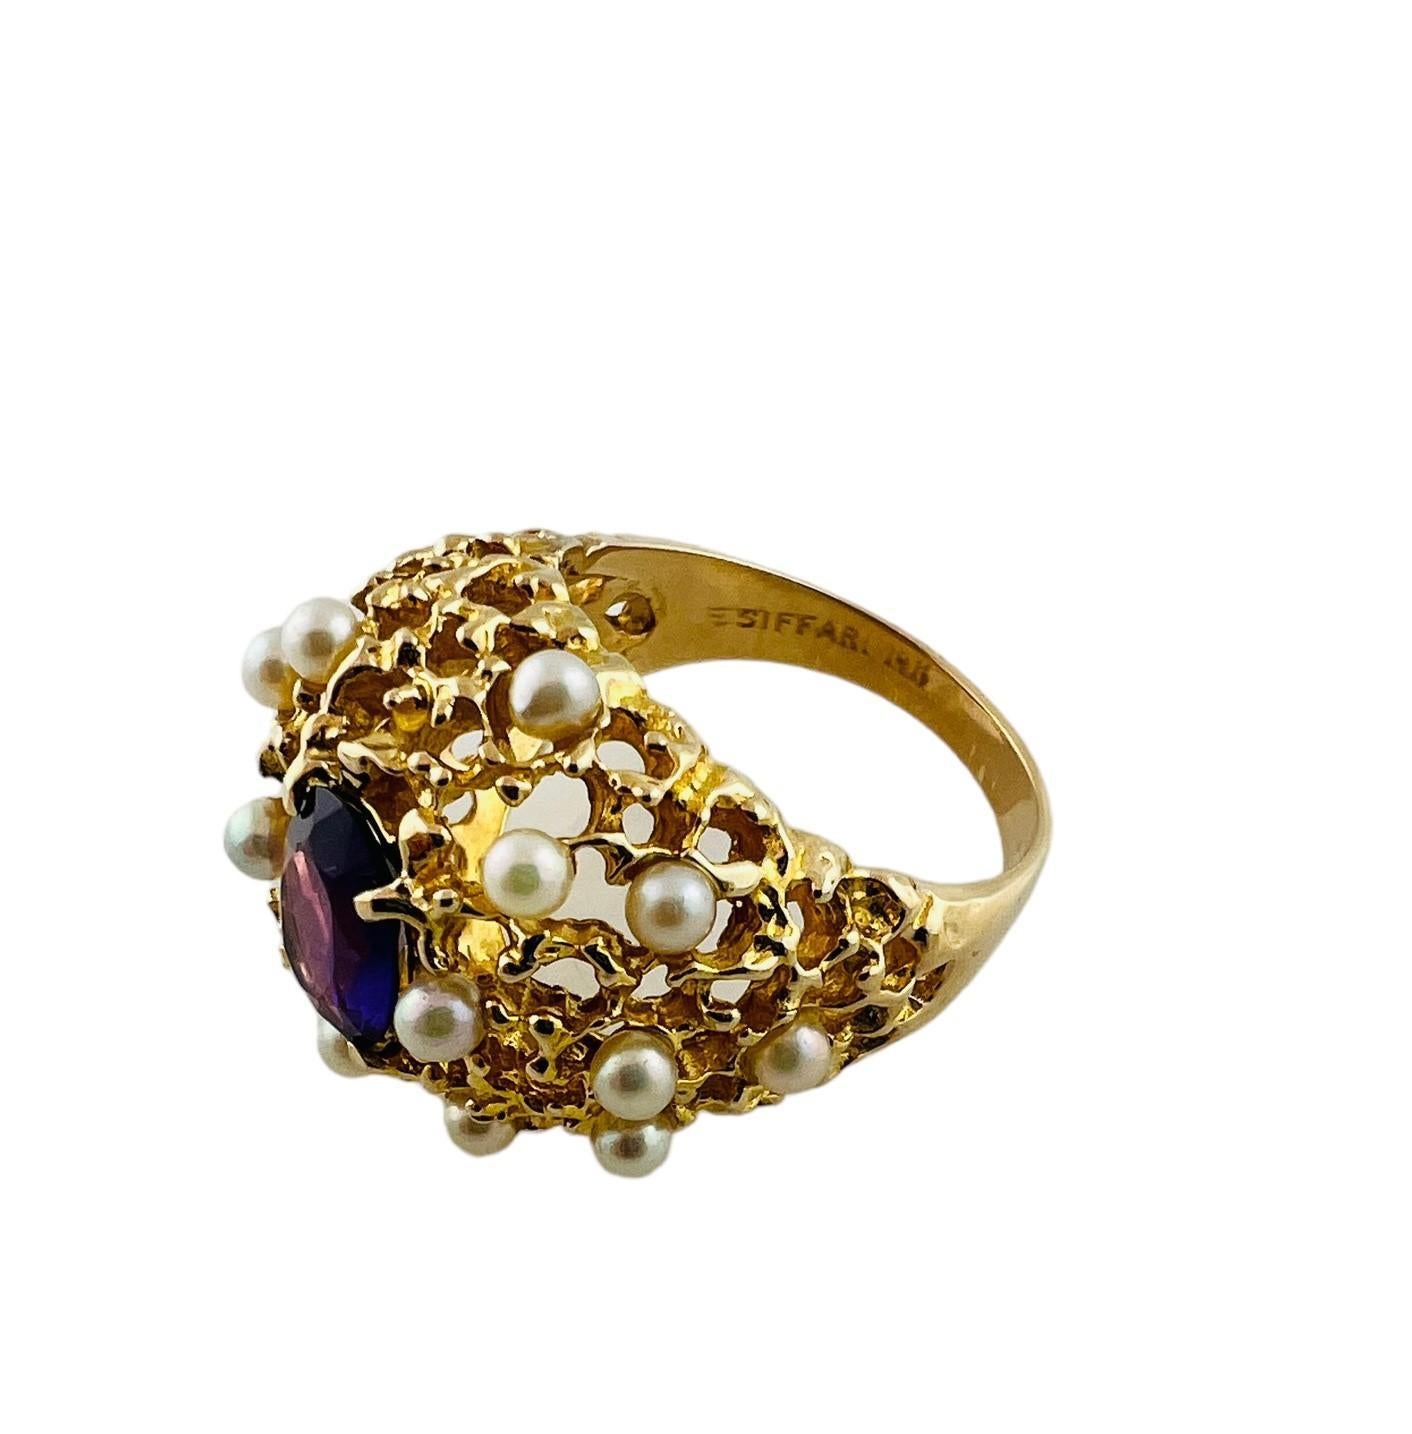 14K Yellow Gold Oval Amethyst and Pearl Dome Ring Size 6.75 #15677 In Good Condition For Sale In Washington Depot, CT